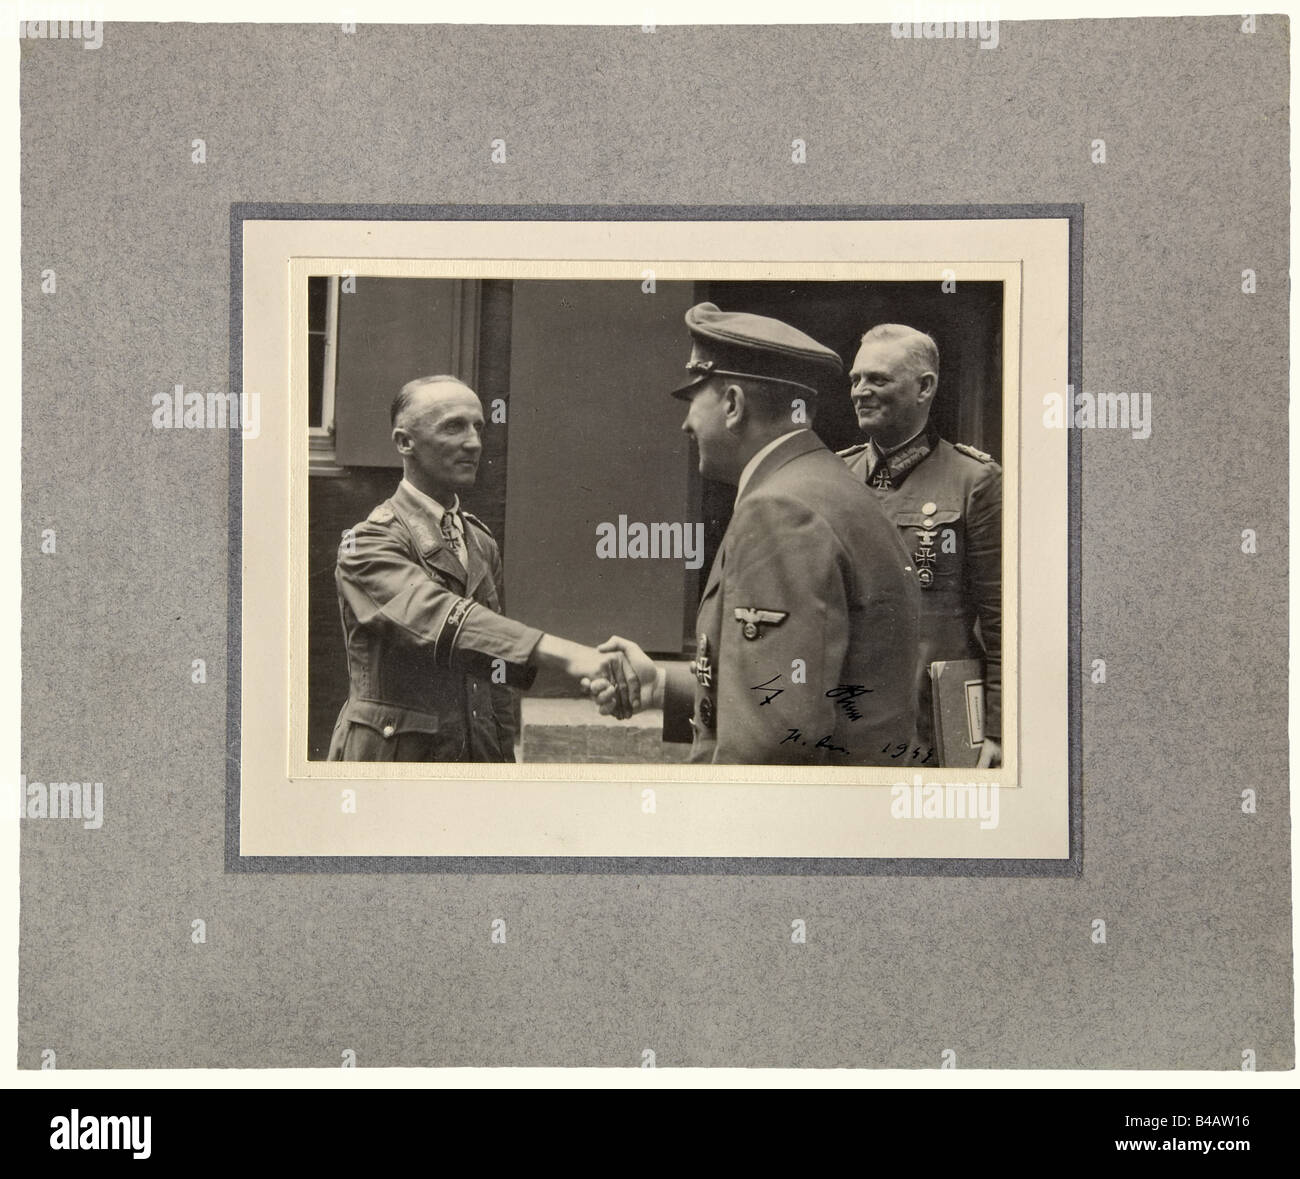 Hasso von Manteuffel - Adolf Hitler., Wide format photo (13 x 18 cm) showing Hitler shaking hands with von Manteuffel, signed on the lower right 'Adolf Hitler - 11. Dez. 1944' in ink. Mounted on passepartout. Only a few days later, the Ardennes Offensive started on 16 December 1944, the last major operation of the German Wehrmacht during which von Manteuffel was awarded the 24th Diamonds to the Knights Cross.' people, 1930s, 20th century, armoured corps, armored corps, tank force, tank forces, branch of service, branches of service, armed service, armed service, Stock Photo